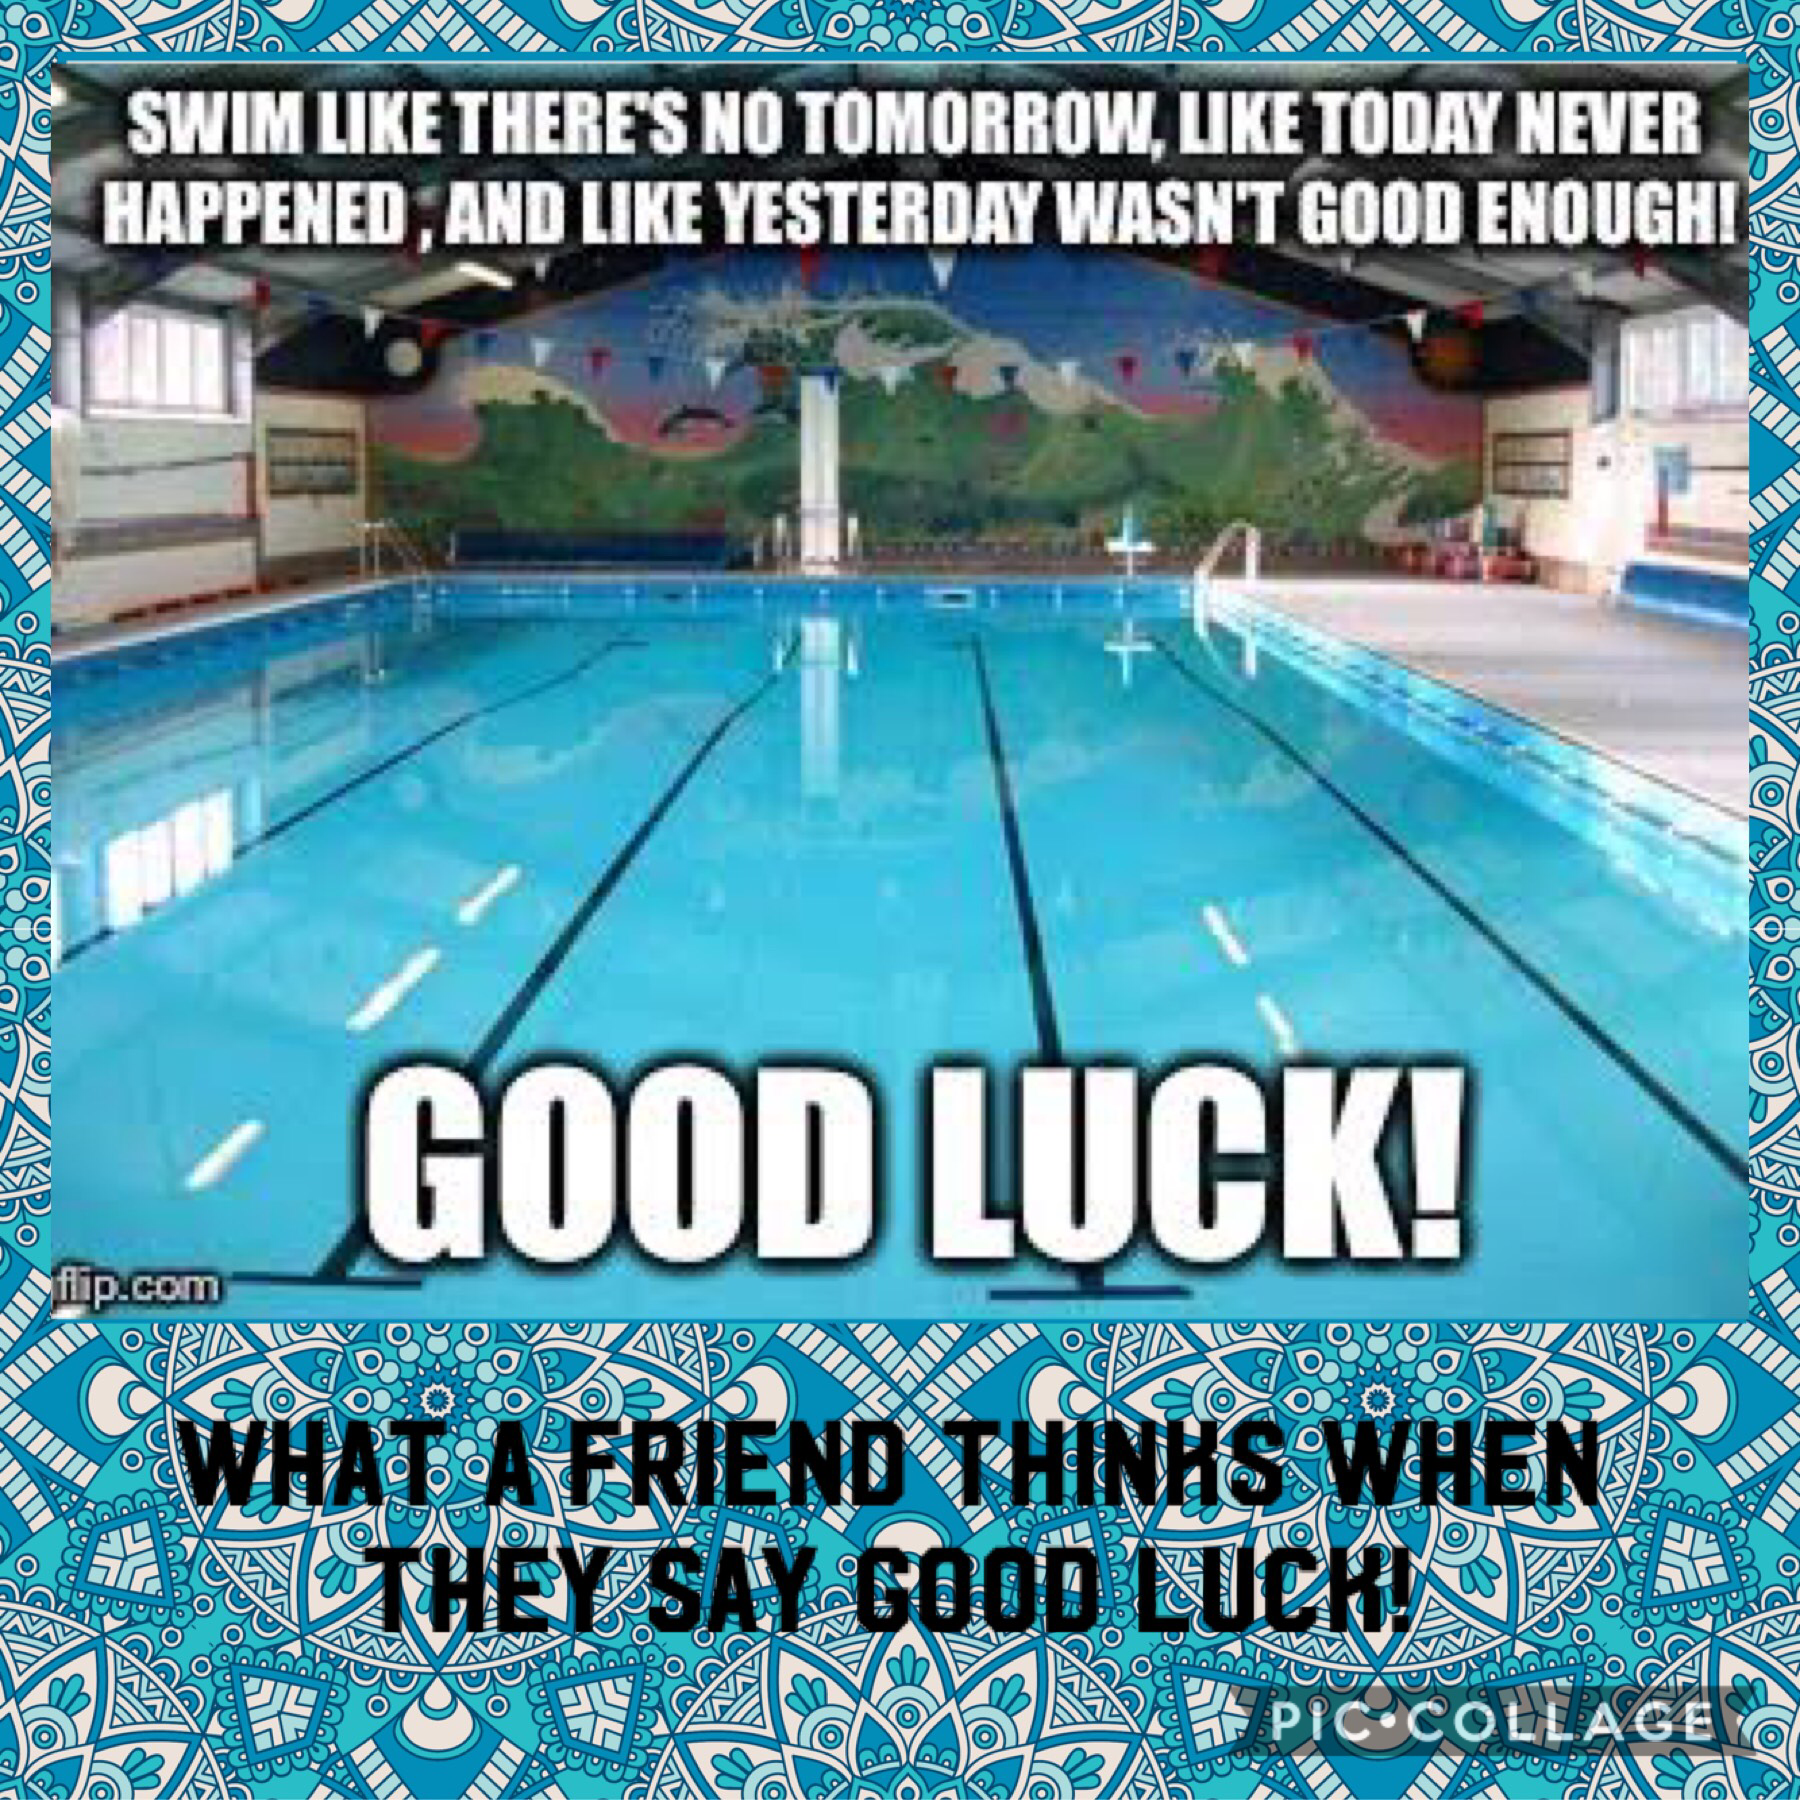 What a friend thinks when they say good luck!